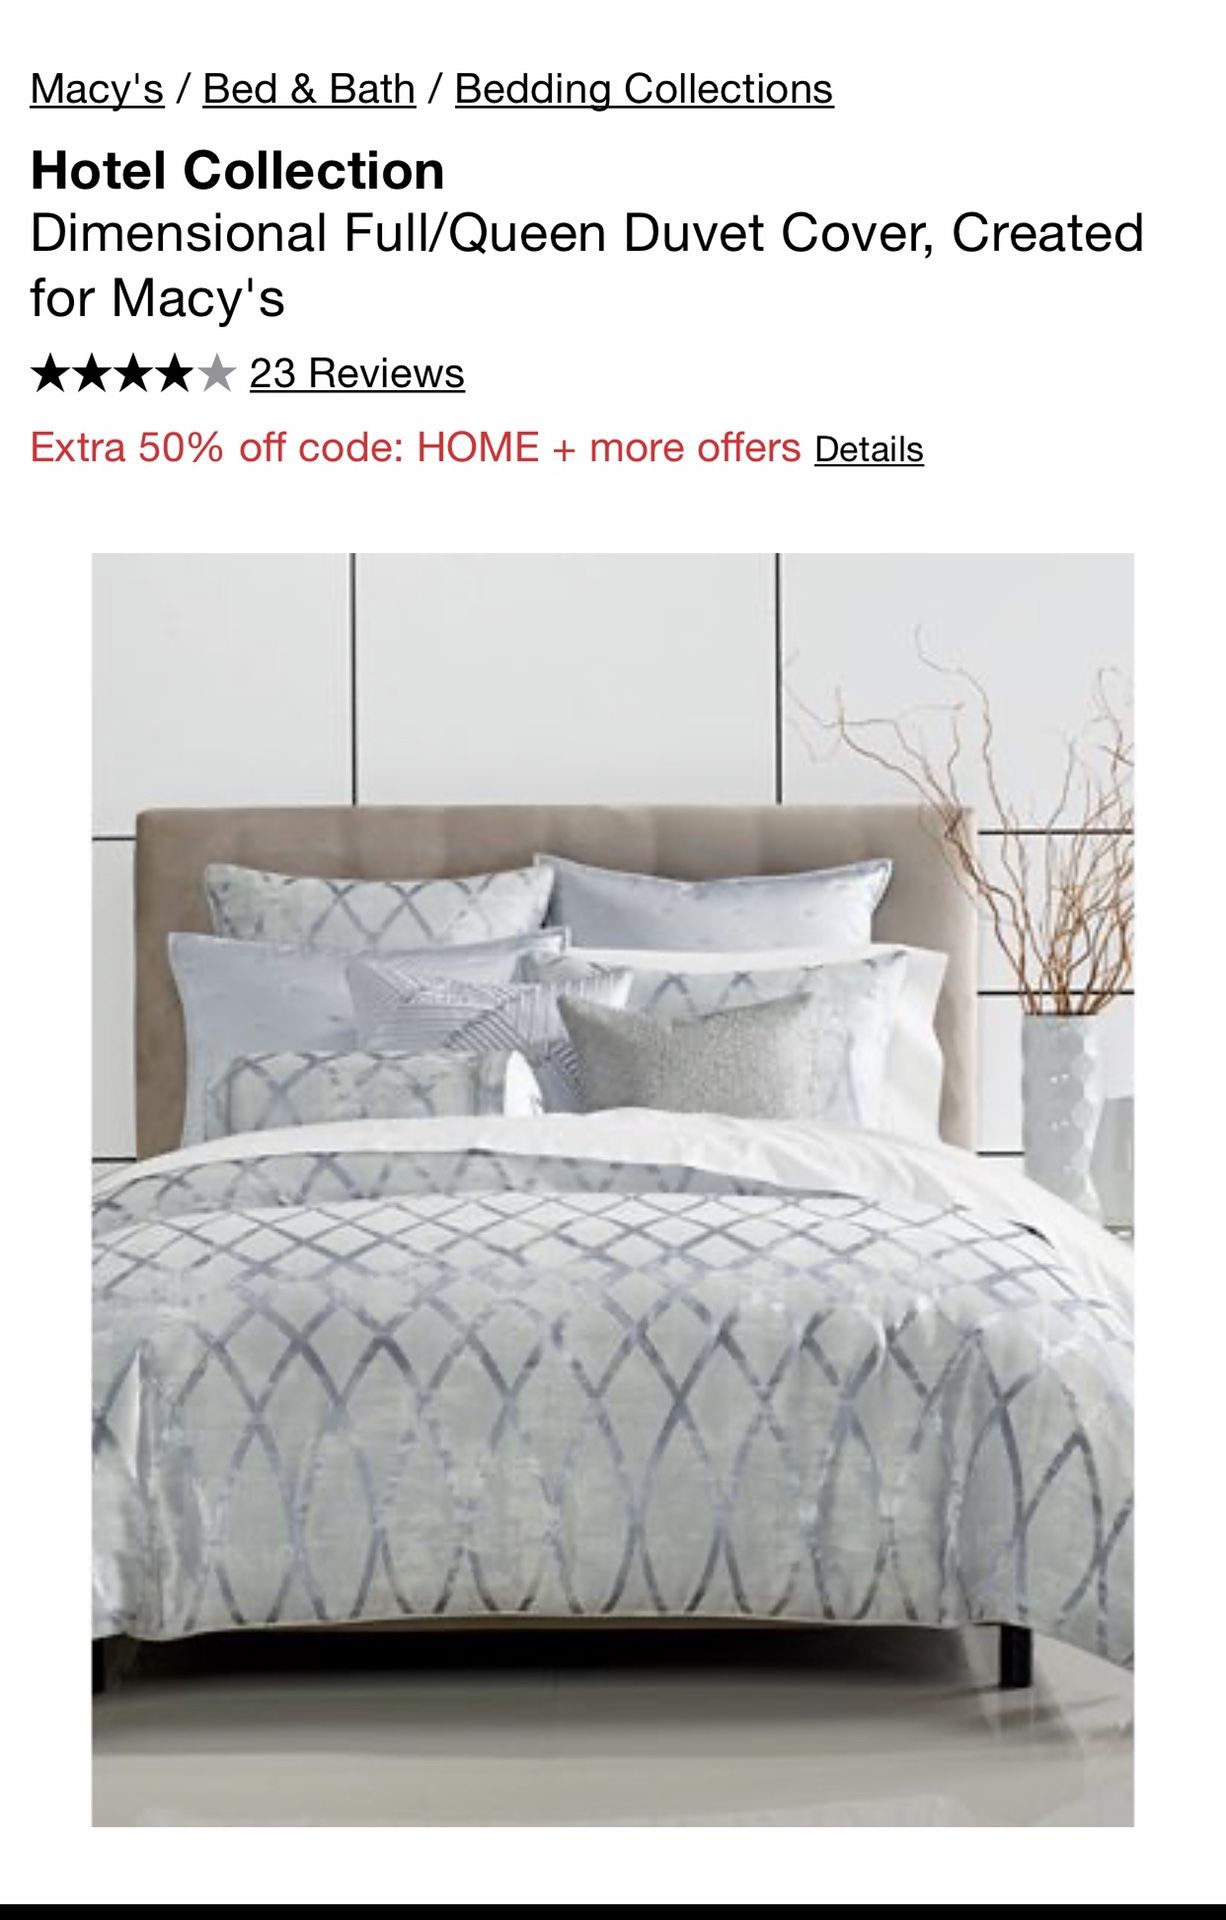 Hotel collection comforter size king $75